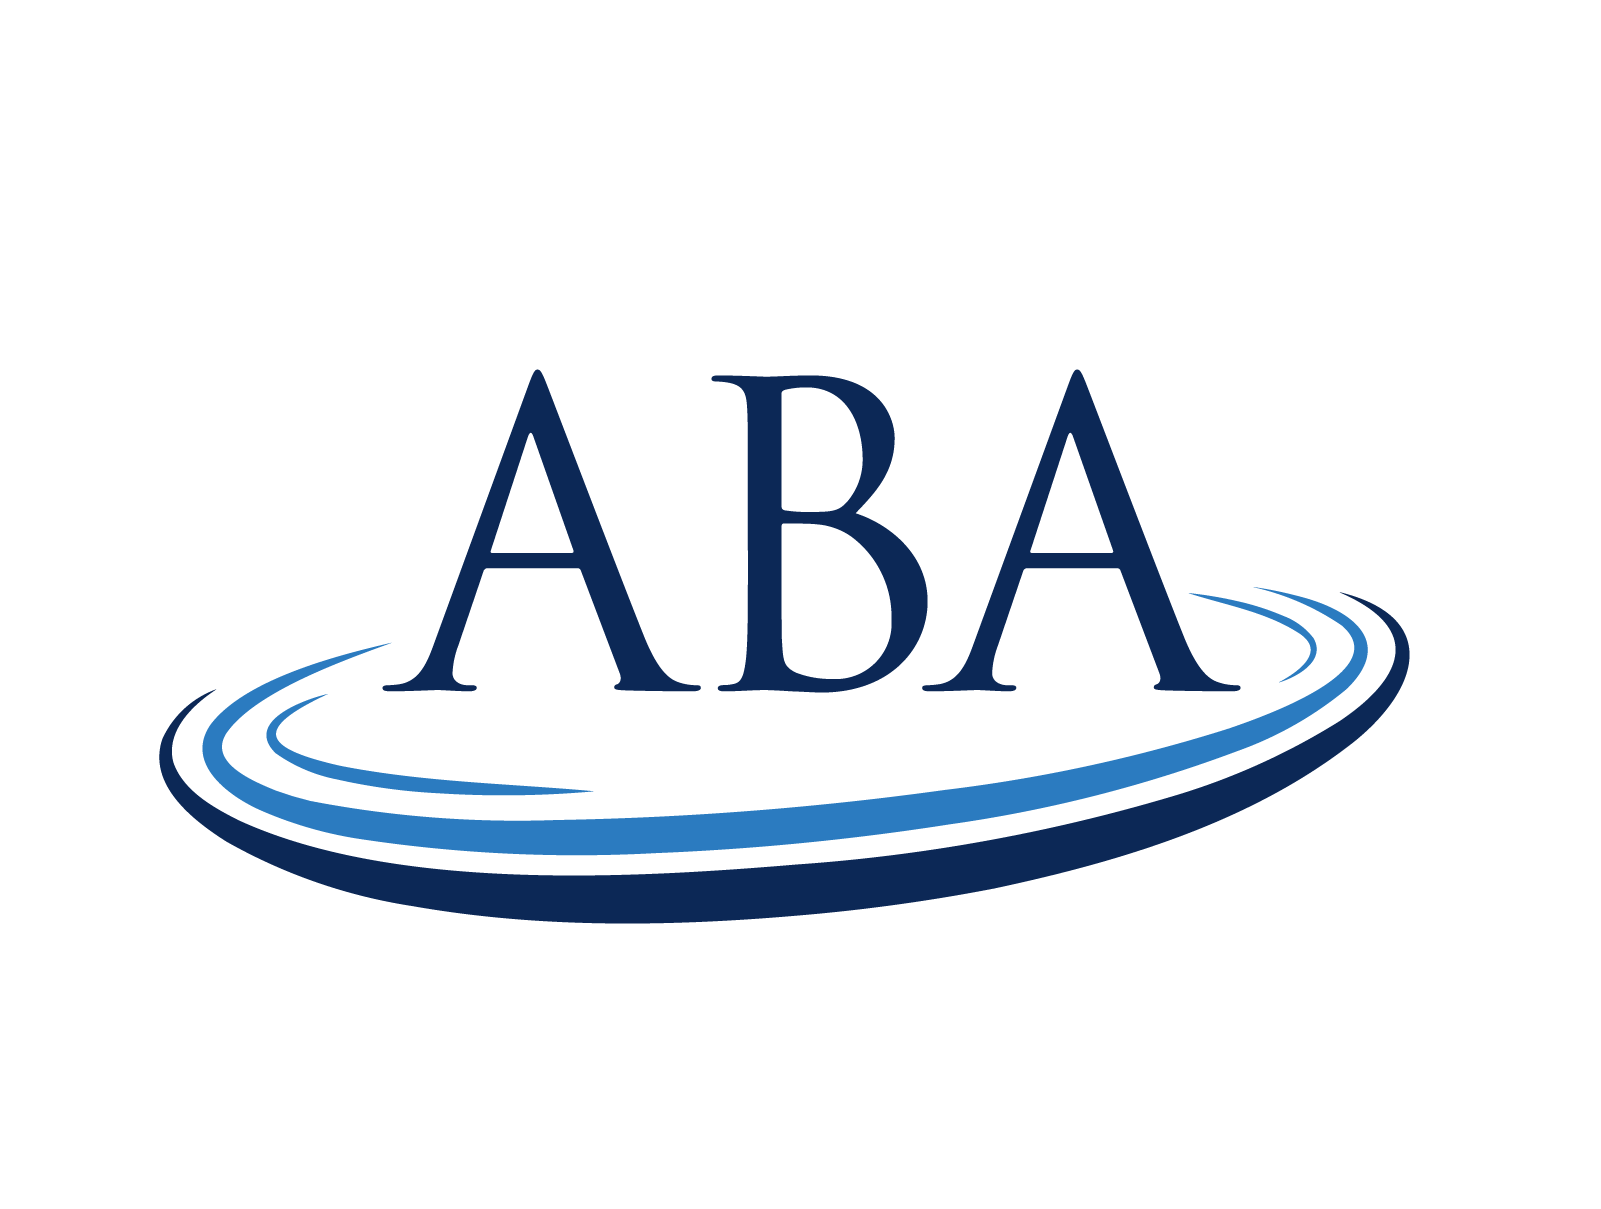 Video Statement from ABA Secretary on the Cancellation of 2020 APPLIED Exams